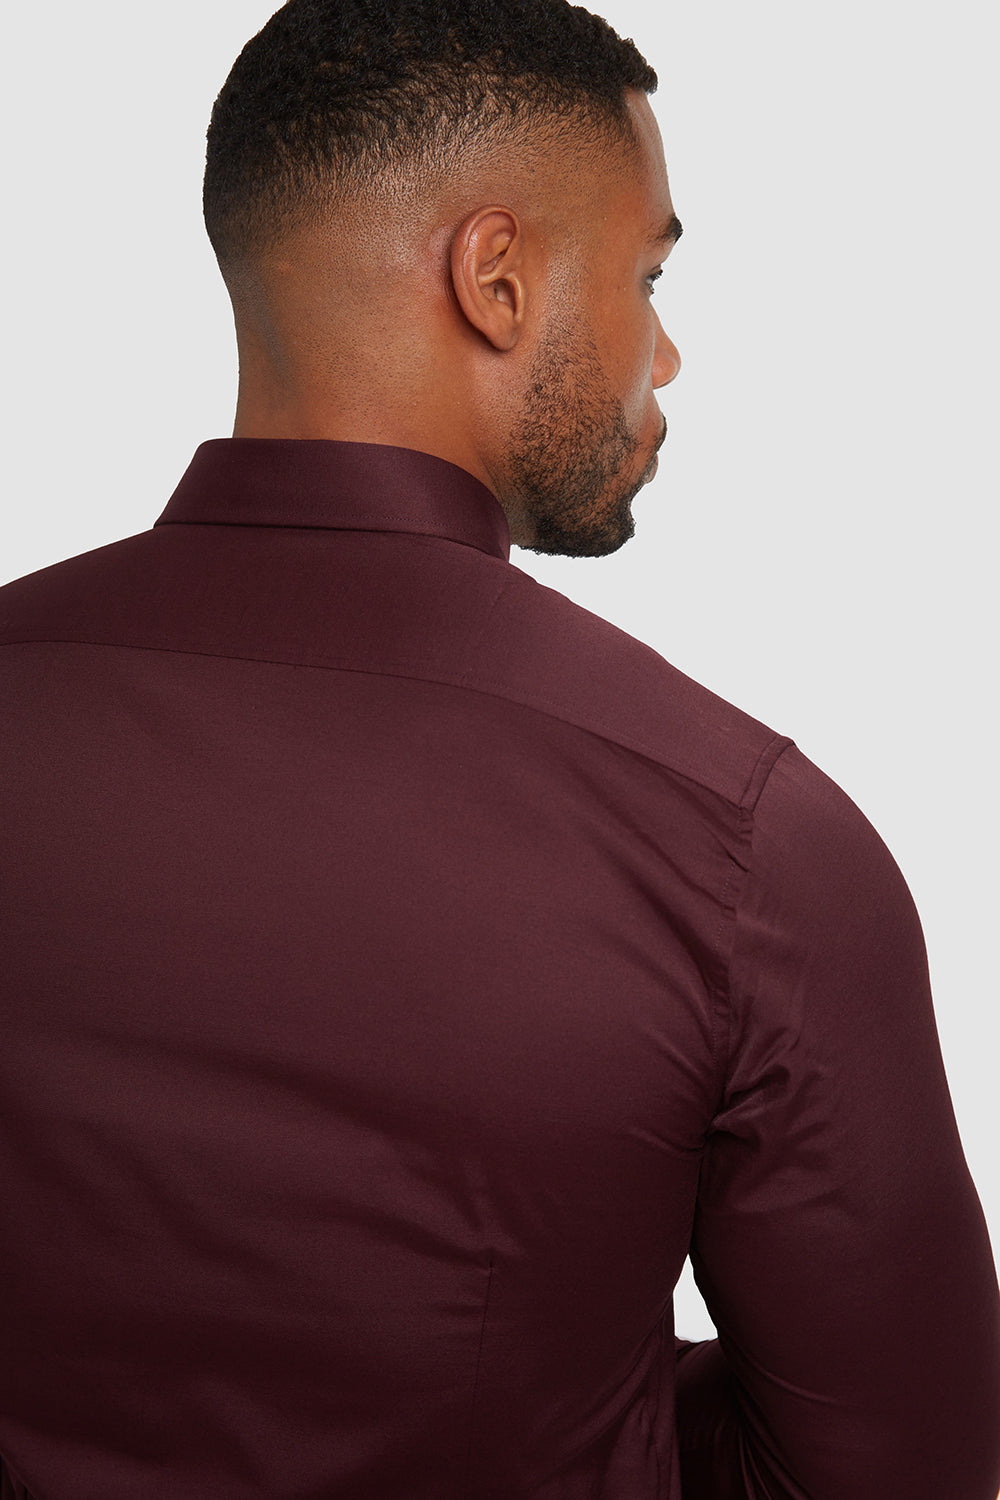 Muscle Fit Signature Shirt in 2.0 USA Burgundy TAILORED ATHLETE - 